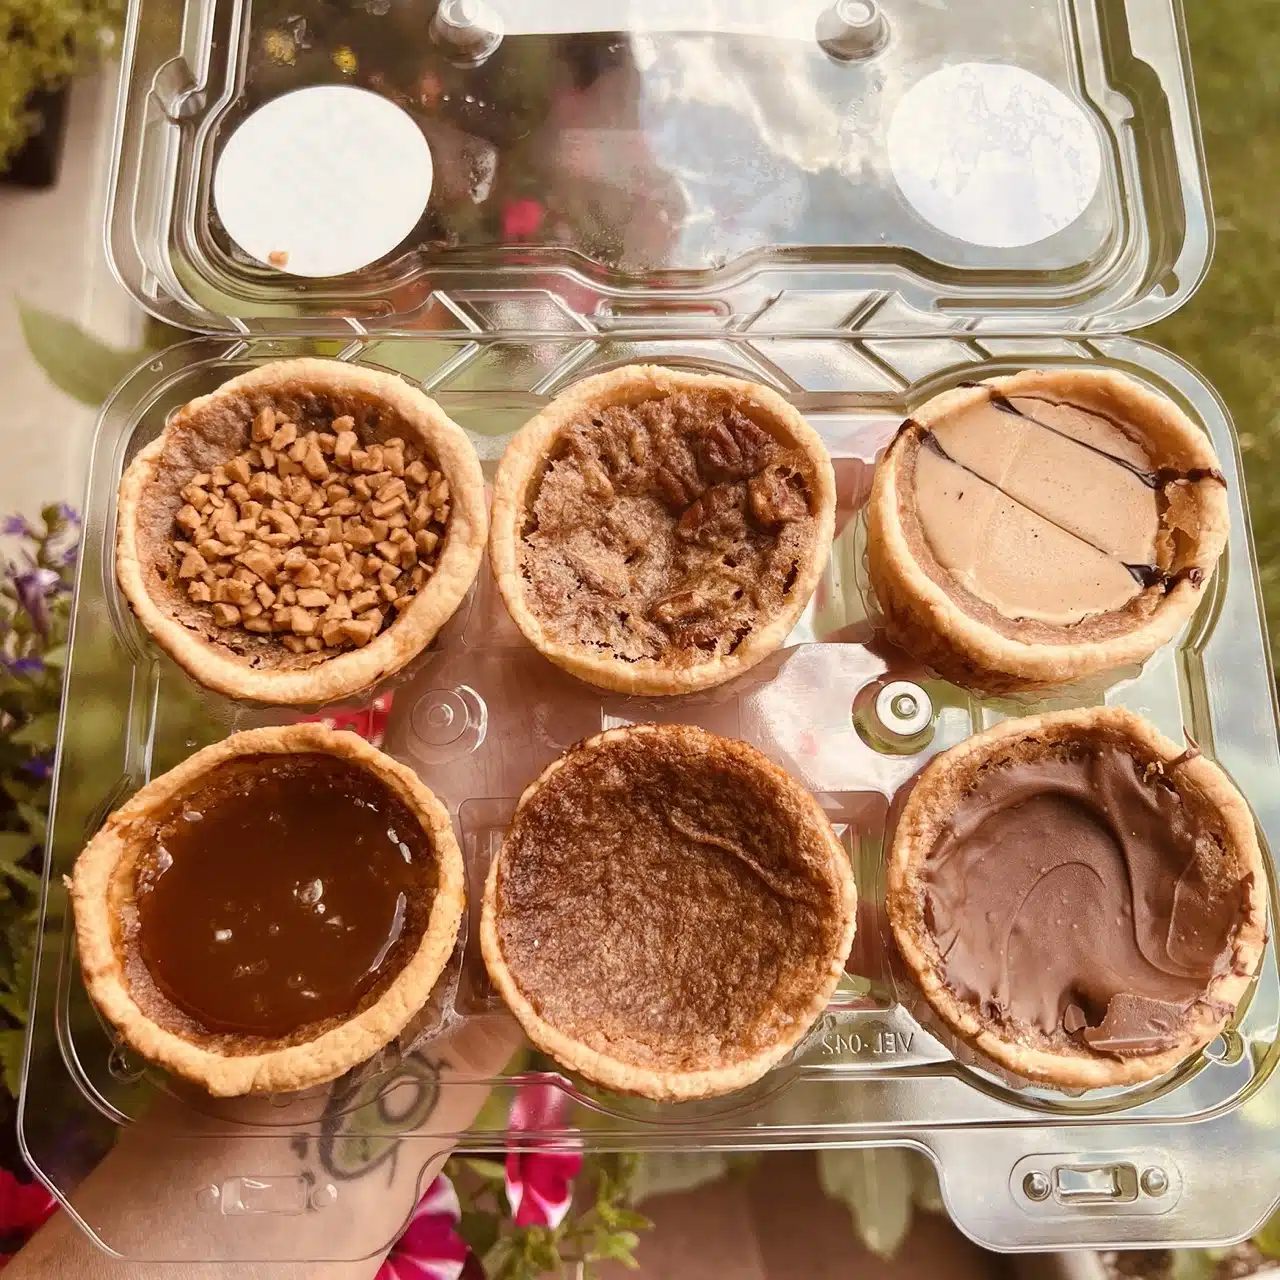 Fan Favourites Butter Tarts in subscription butte tarts & cookies